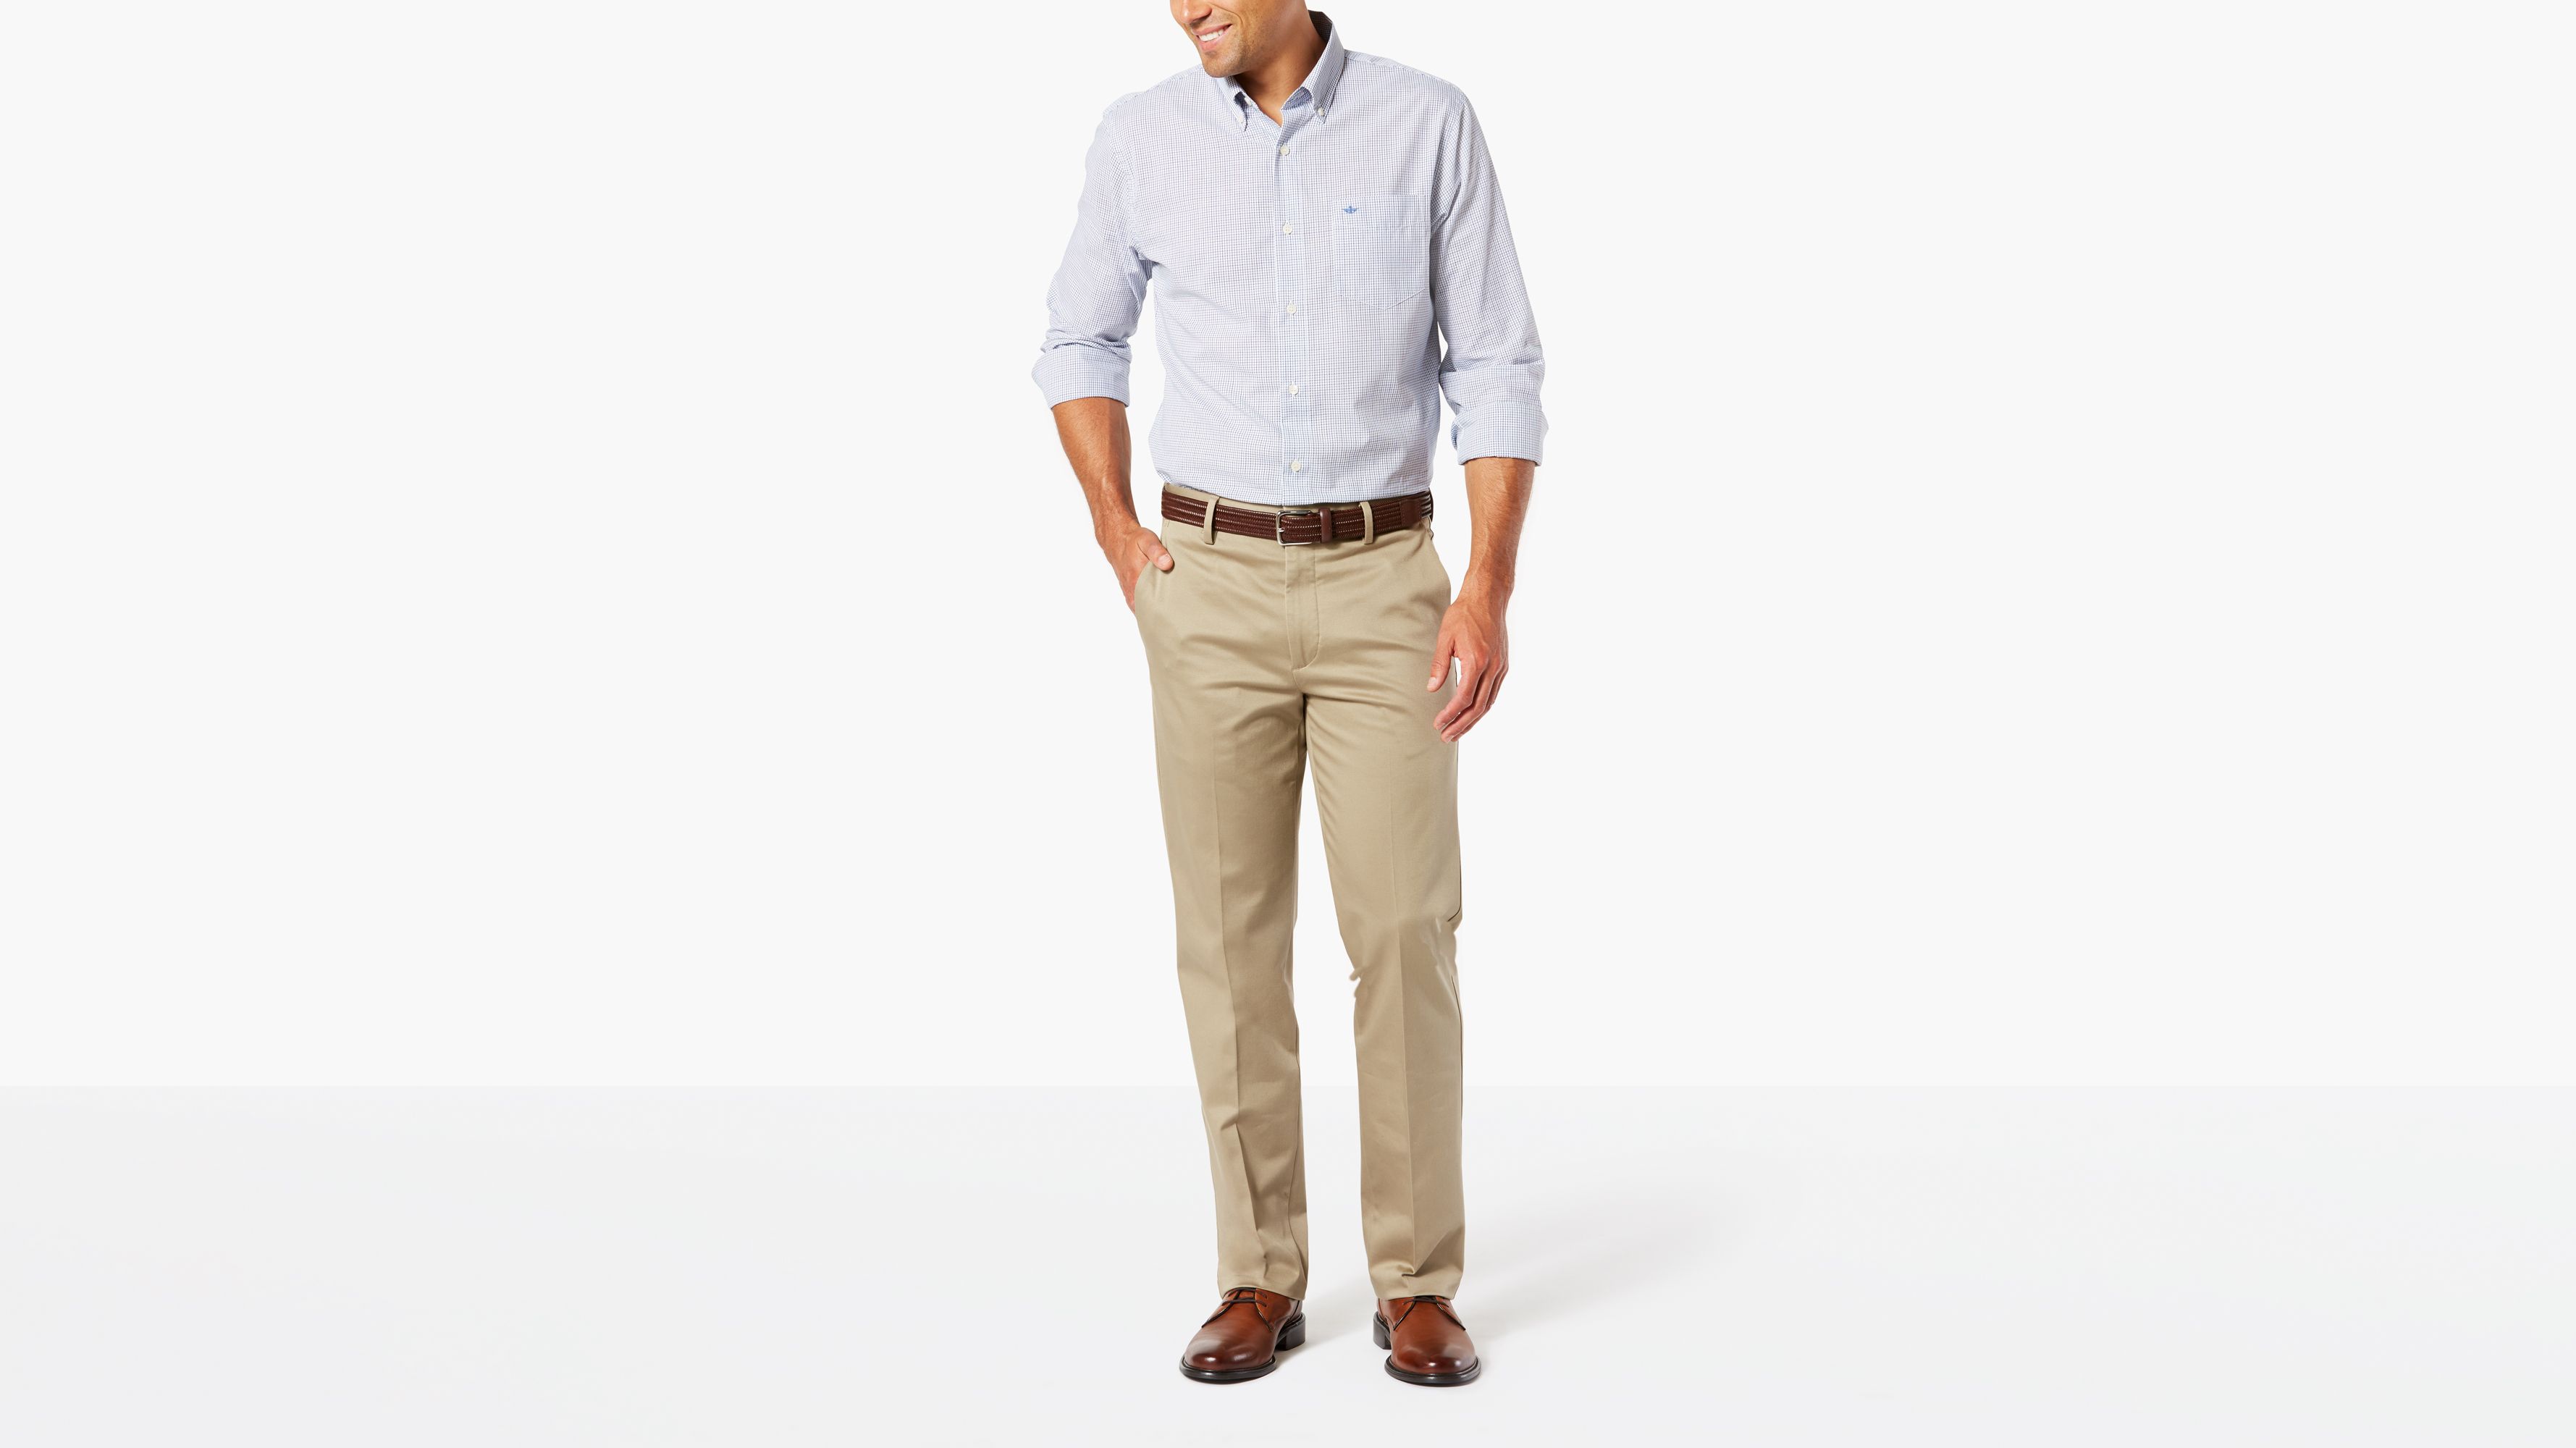 color shirt with beige pants